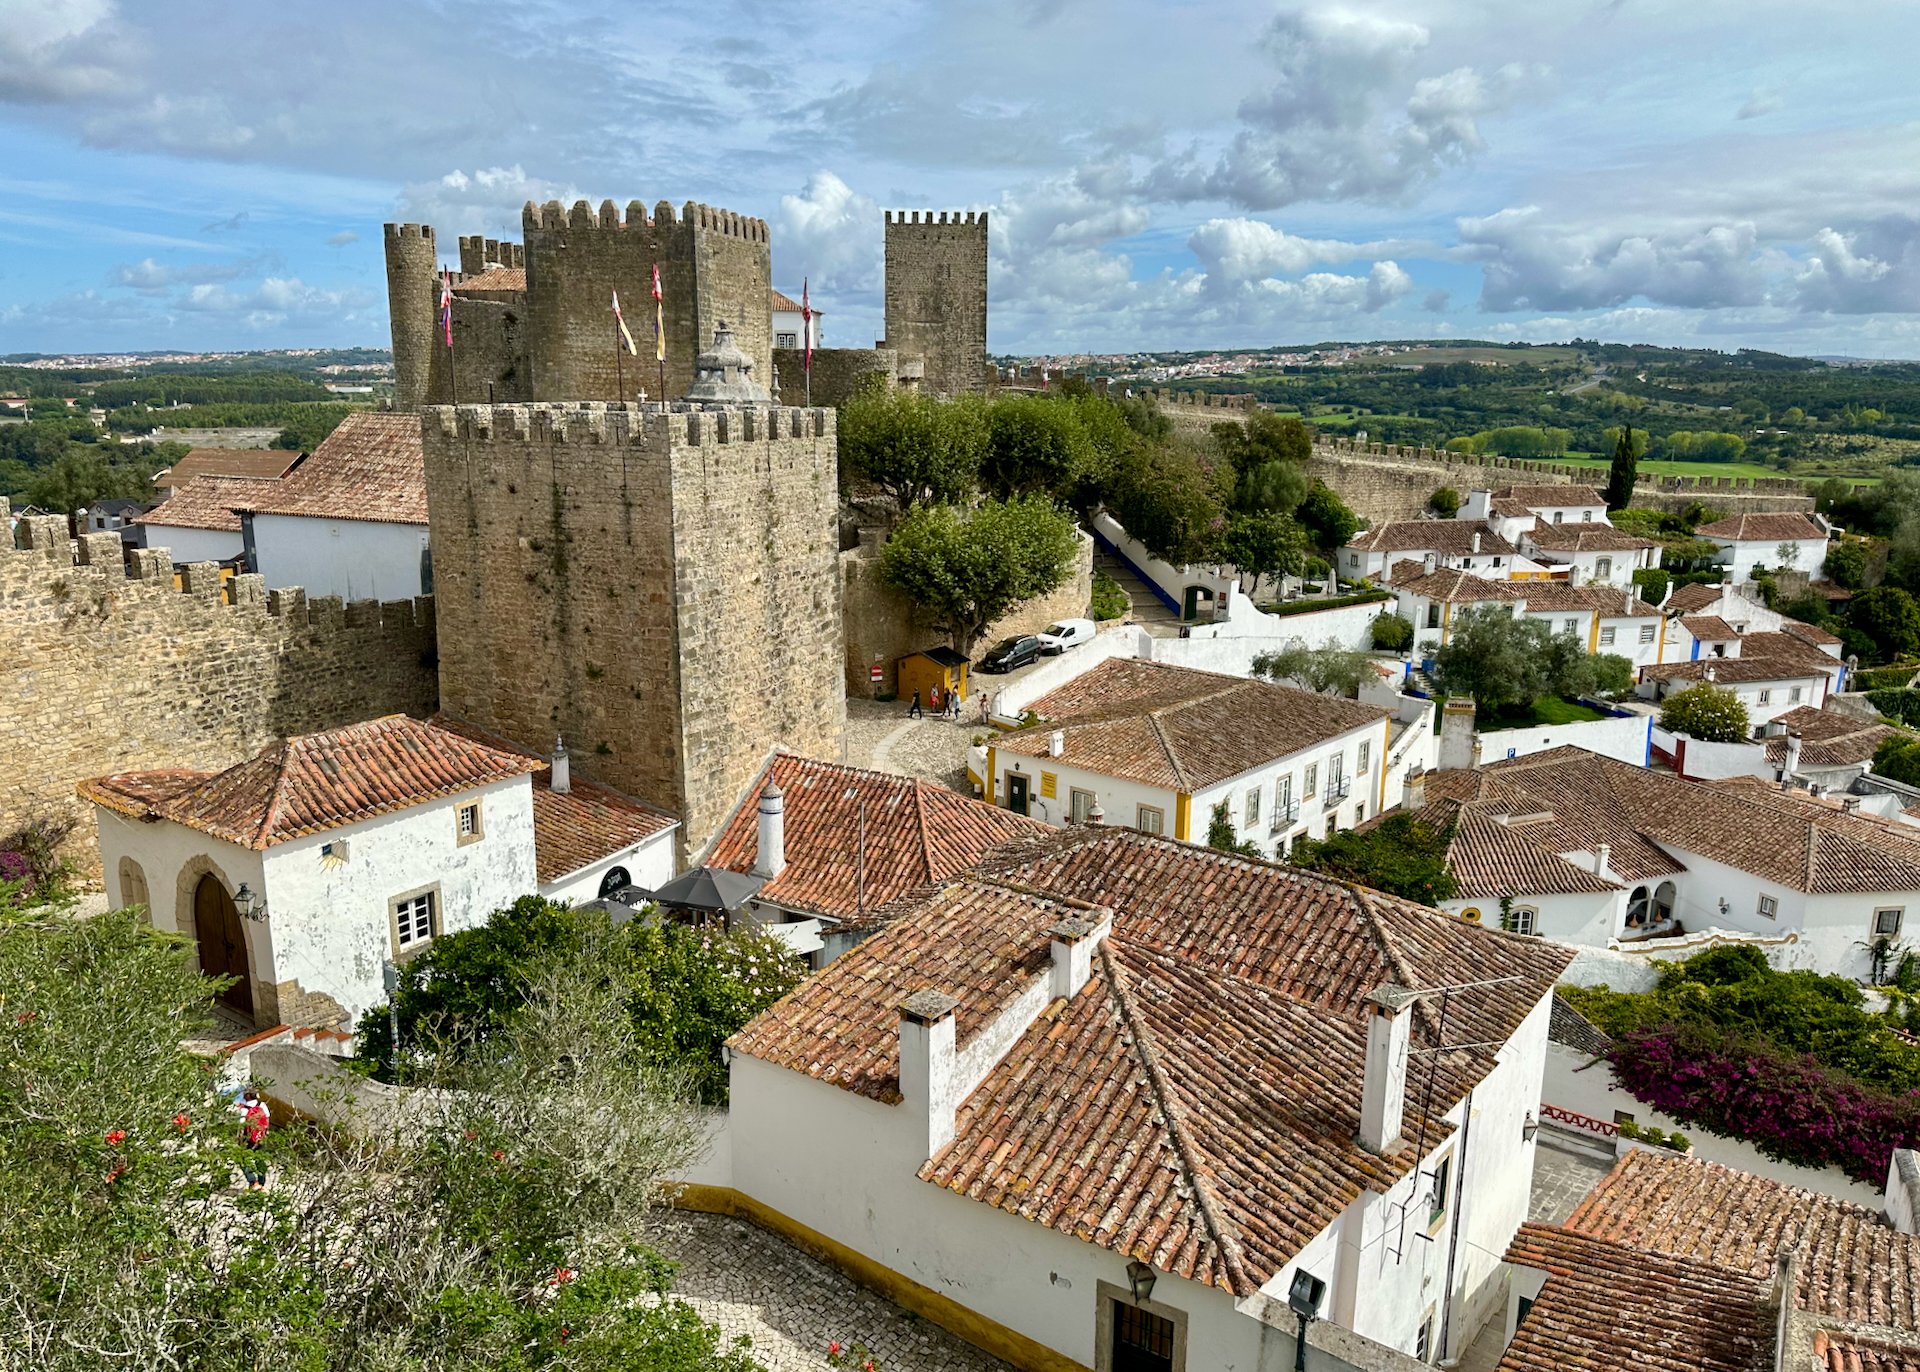  A view over the town, from the castle walls.  